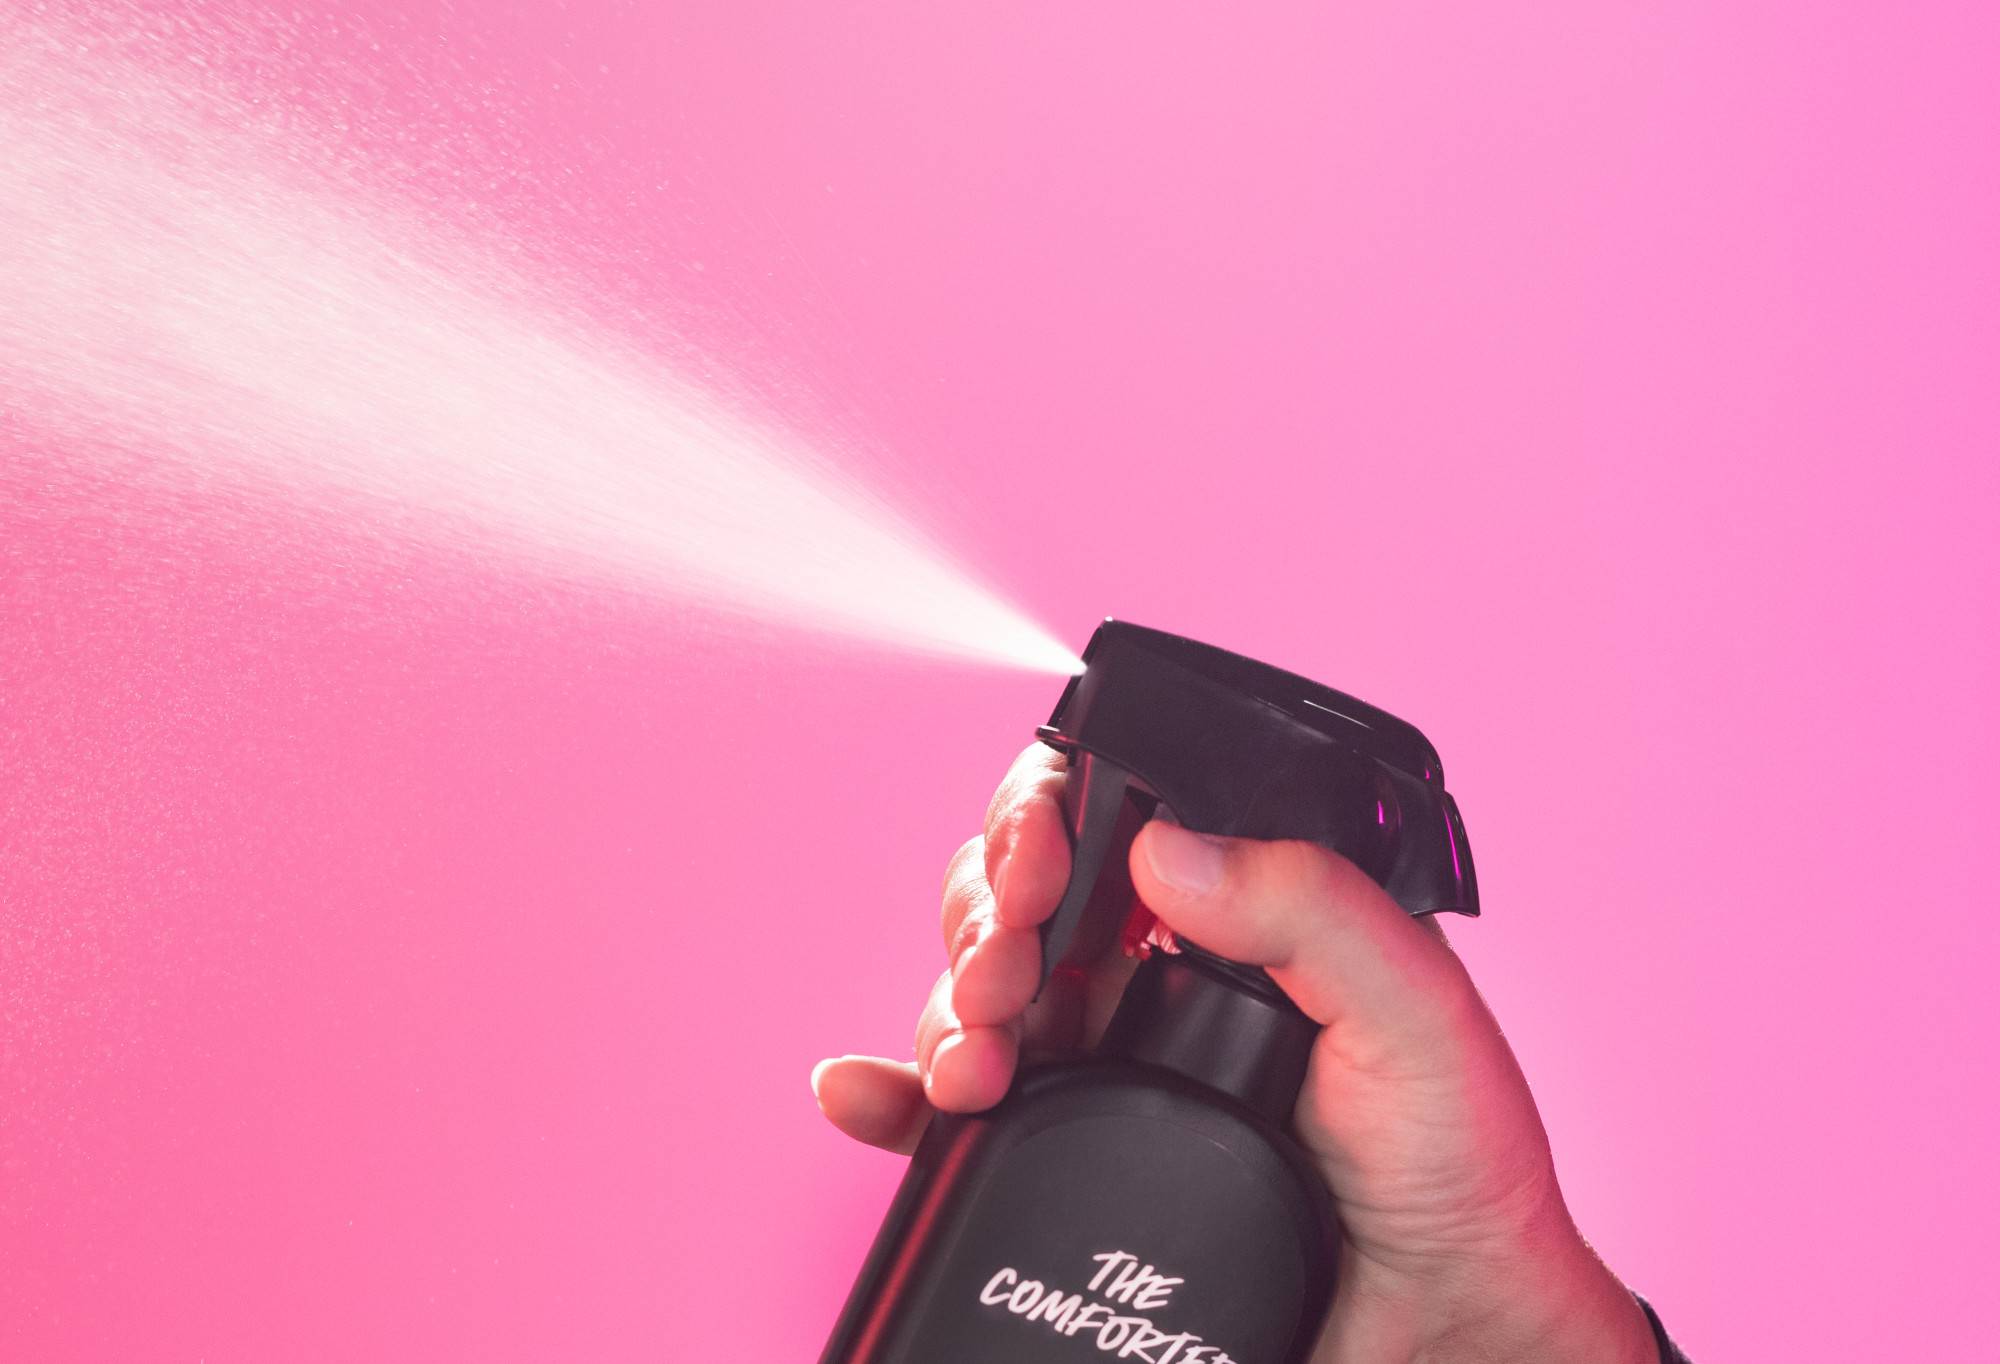 The Comforter body spray is sprayed up into the air, in front of a vibrant, candy pink background.